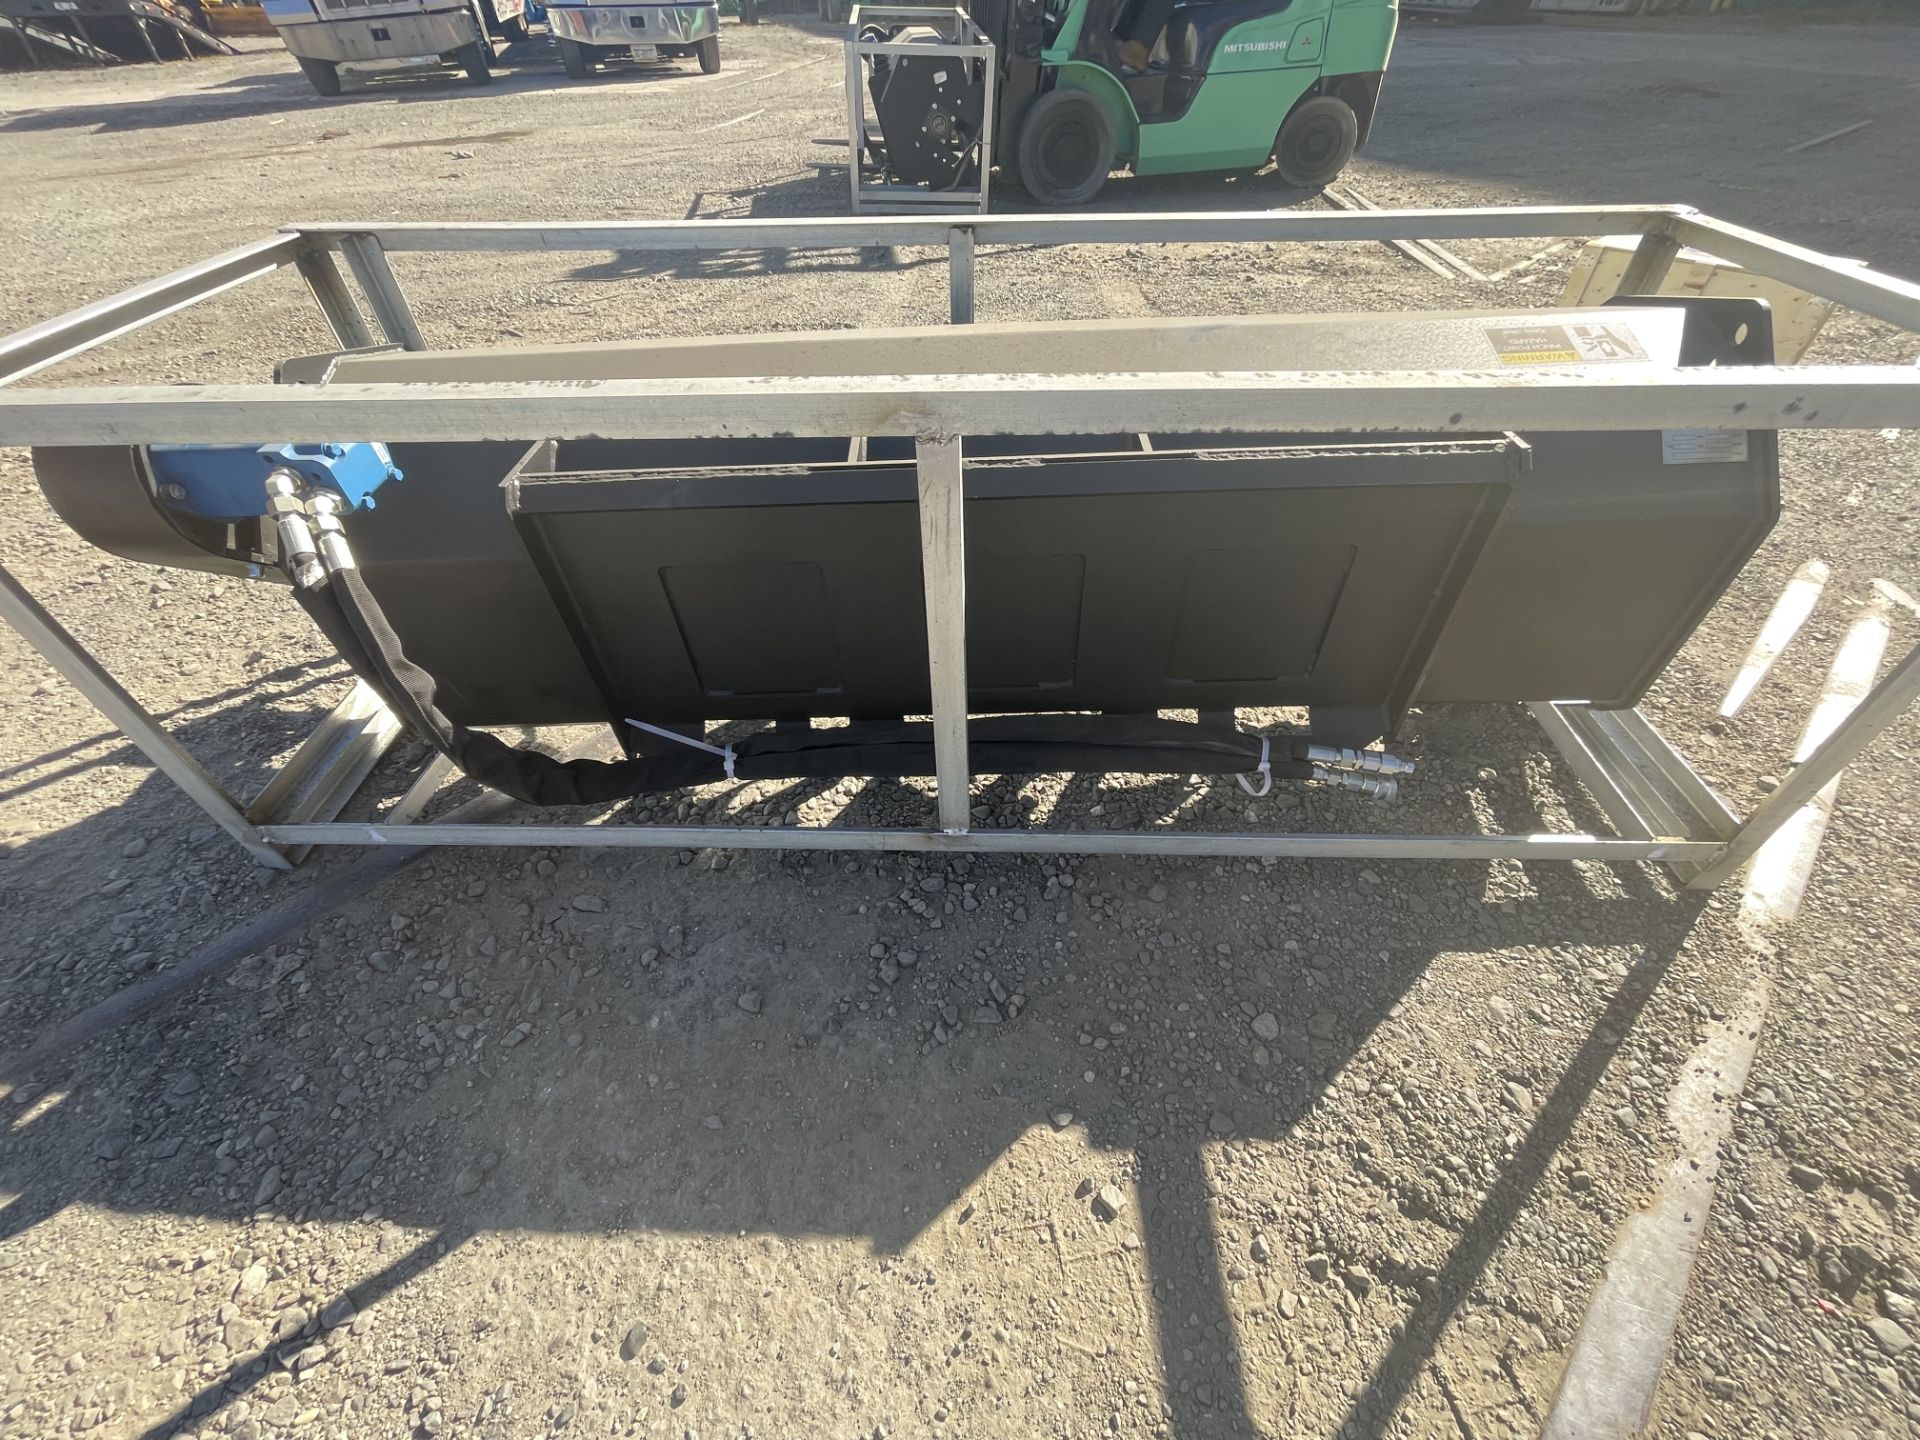 Brand New 72" Skid Steer Cultivator Attach.(NY139E) - Image 5 of 8